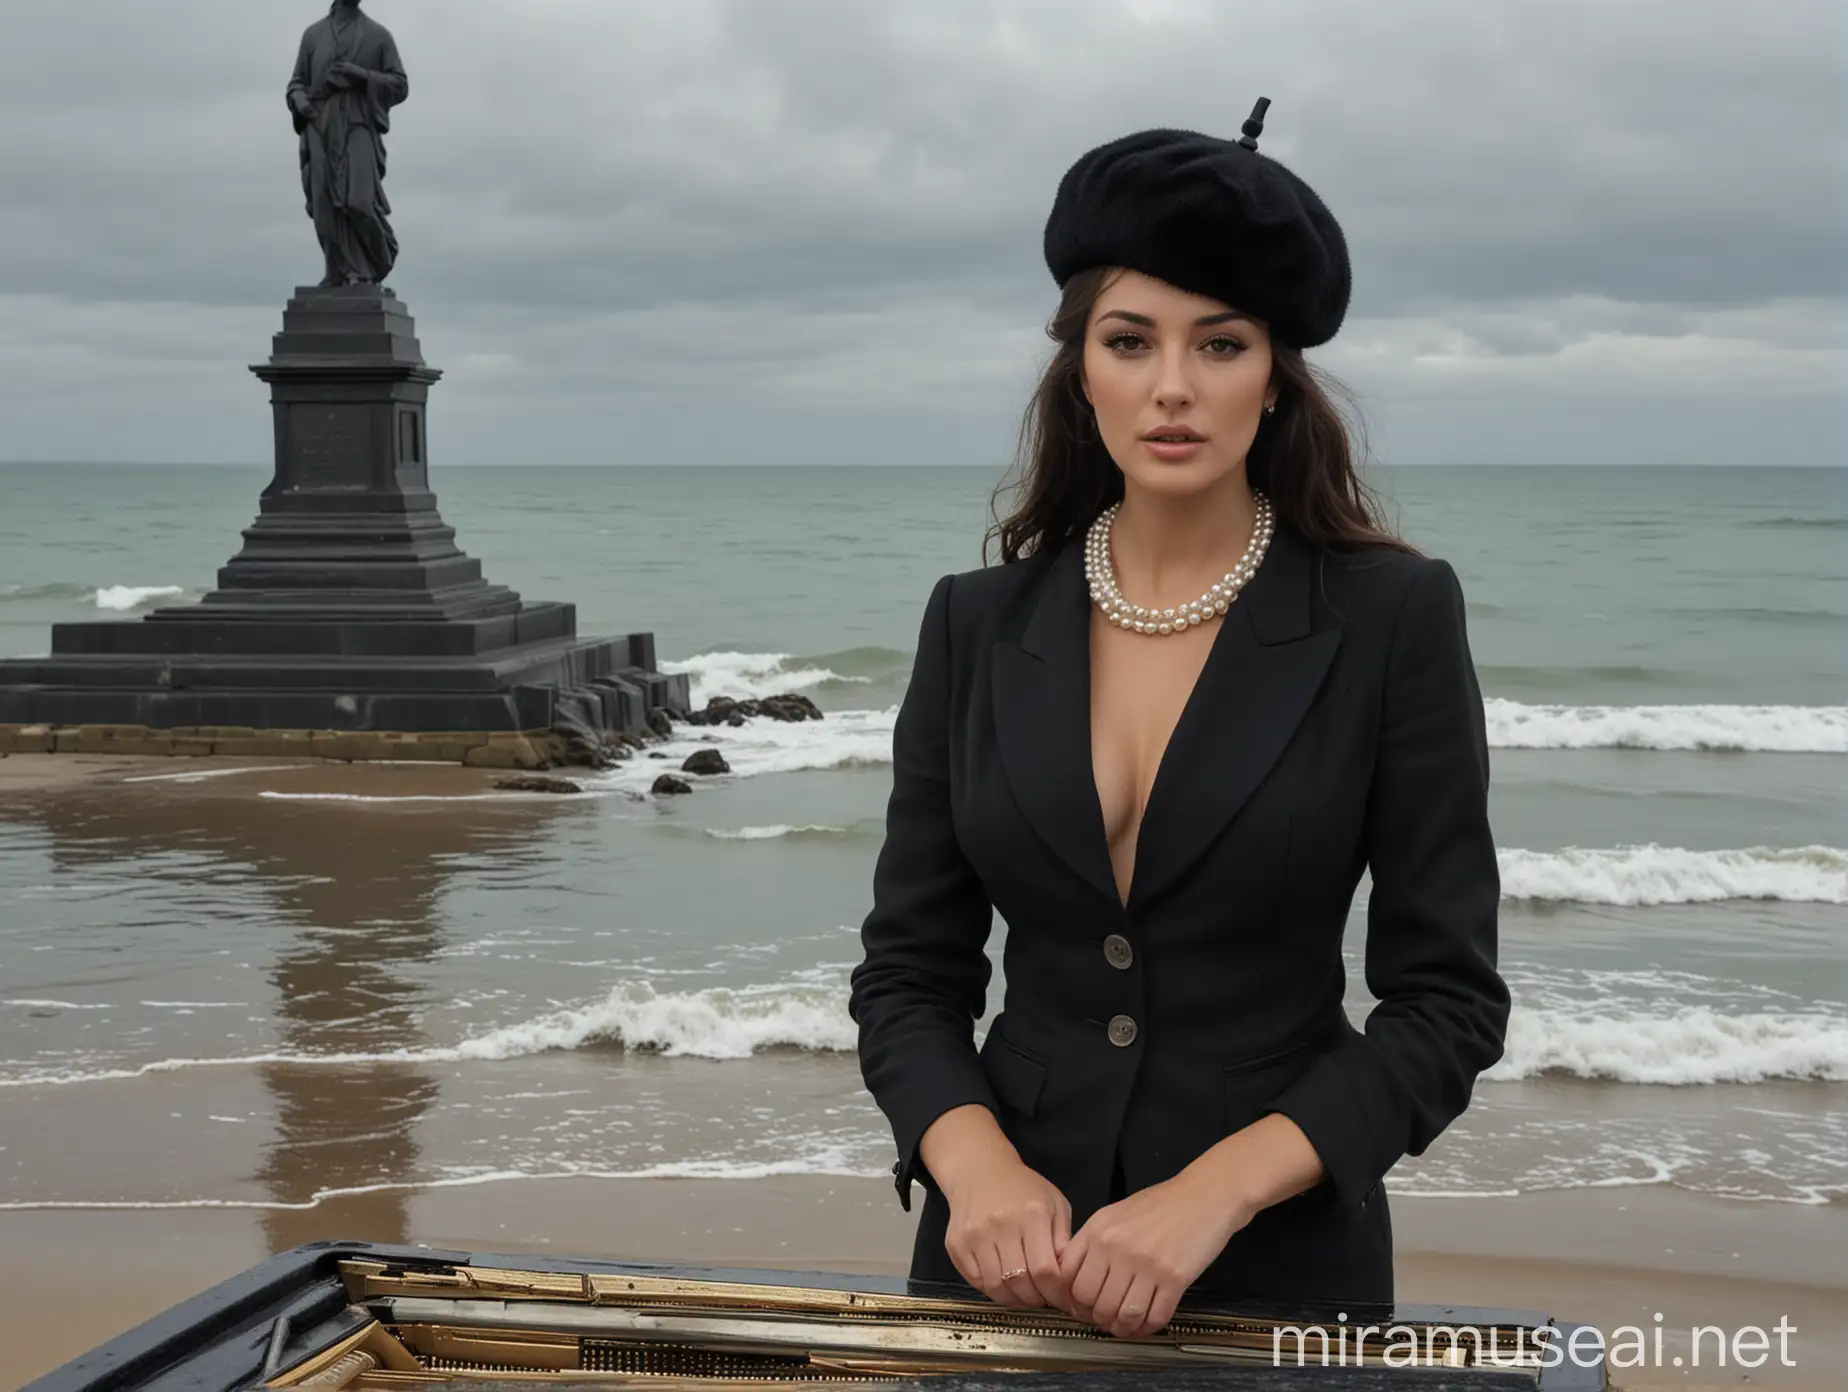 Deva Cassel who is Monica Bellucci's daughter, with 60s makeup and hairstyle, wearing black wool bubbly pillbox hat, pearl necklace, and black blazer, stands by the piano on the sea shore, the weather is cloudy, there are waves in the sea, ������ ���� �full shot